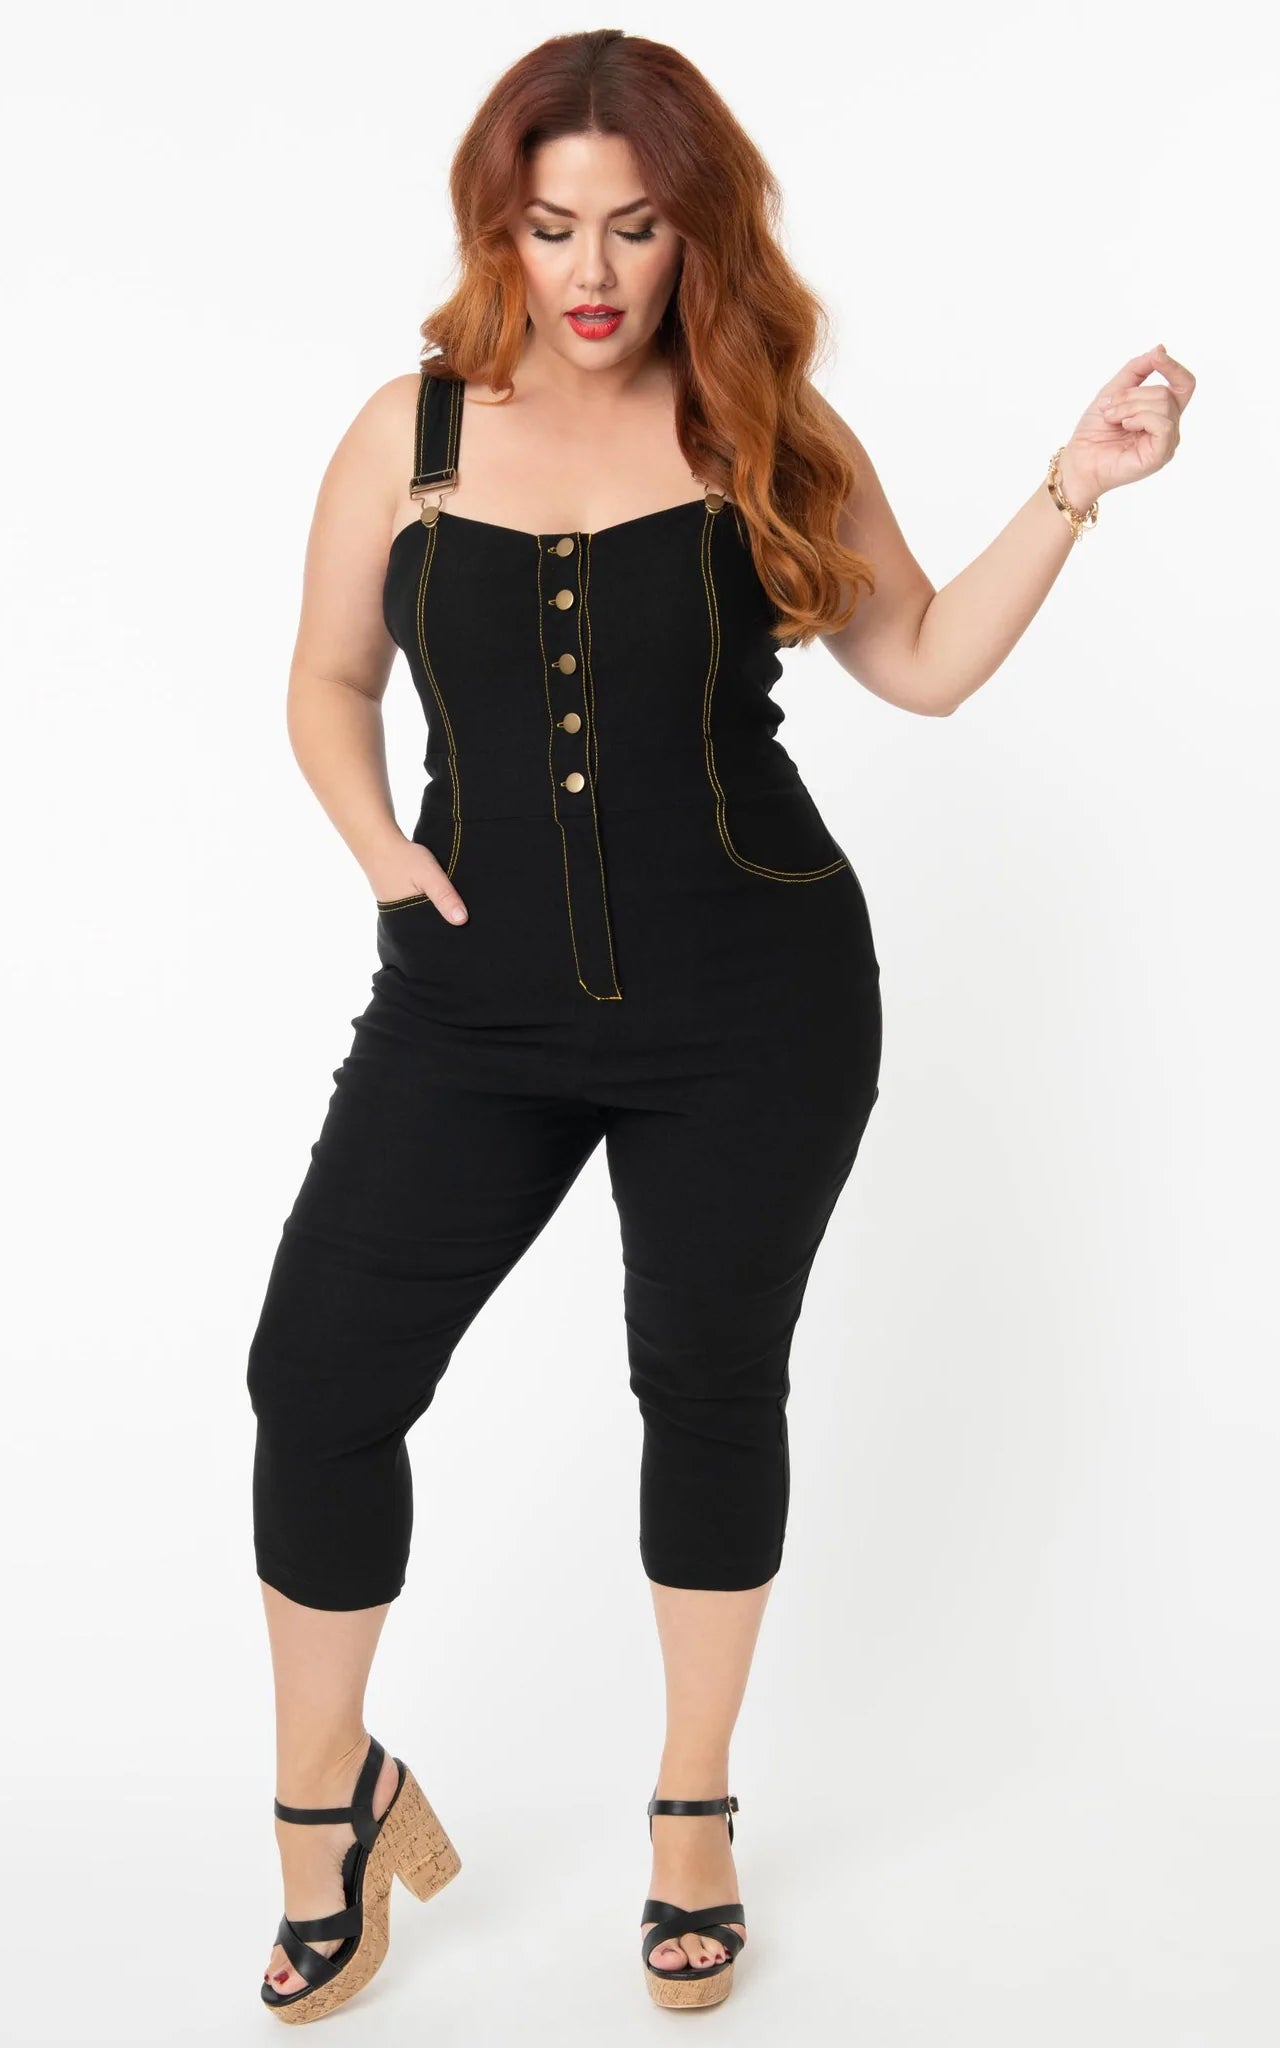 MODERN New with Tags UNIQUE VINTAGE Retro Stretchy Black Jeans Overalls Jumpsuit Birthday Life Vintage